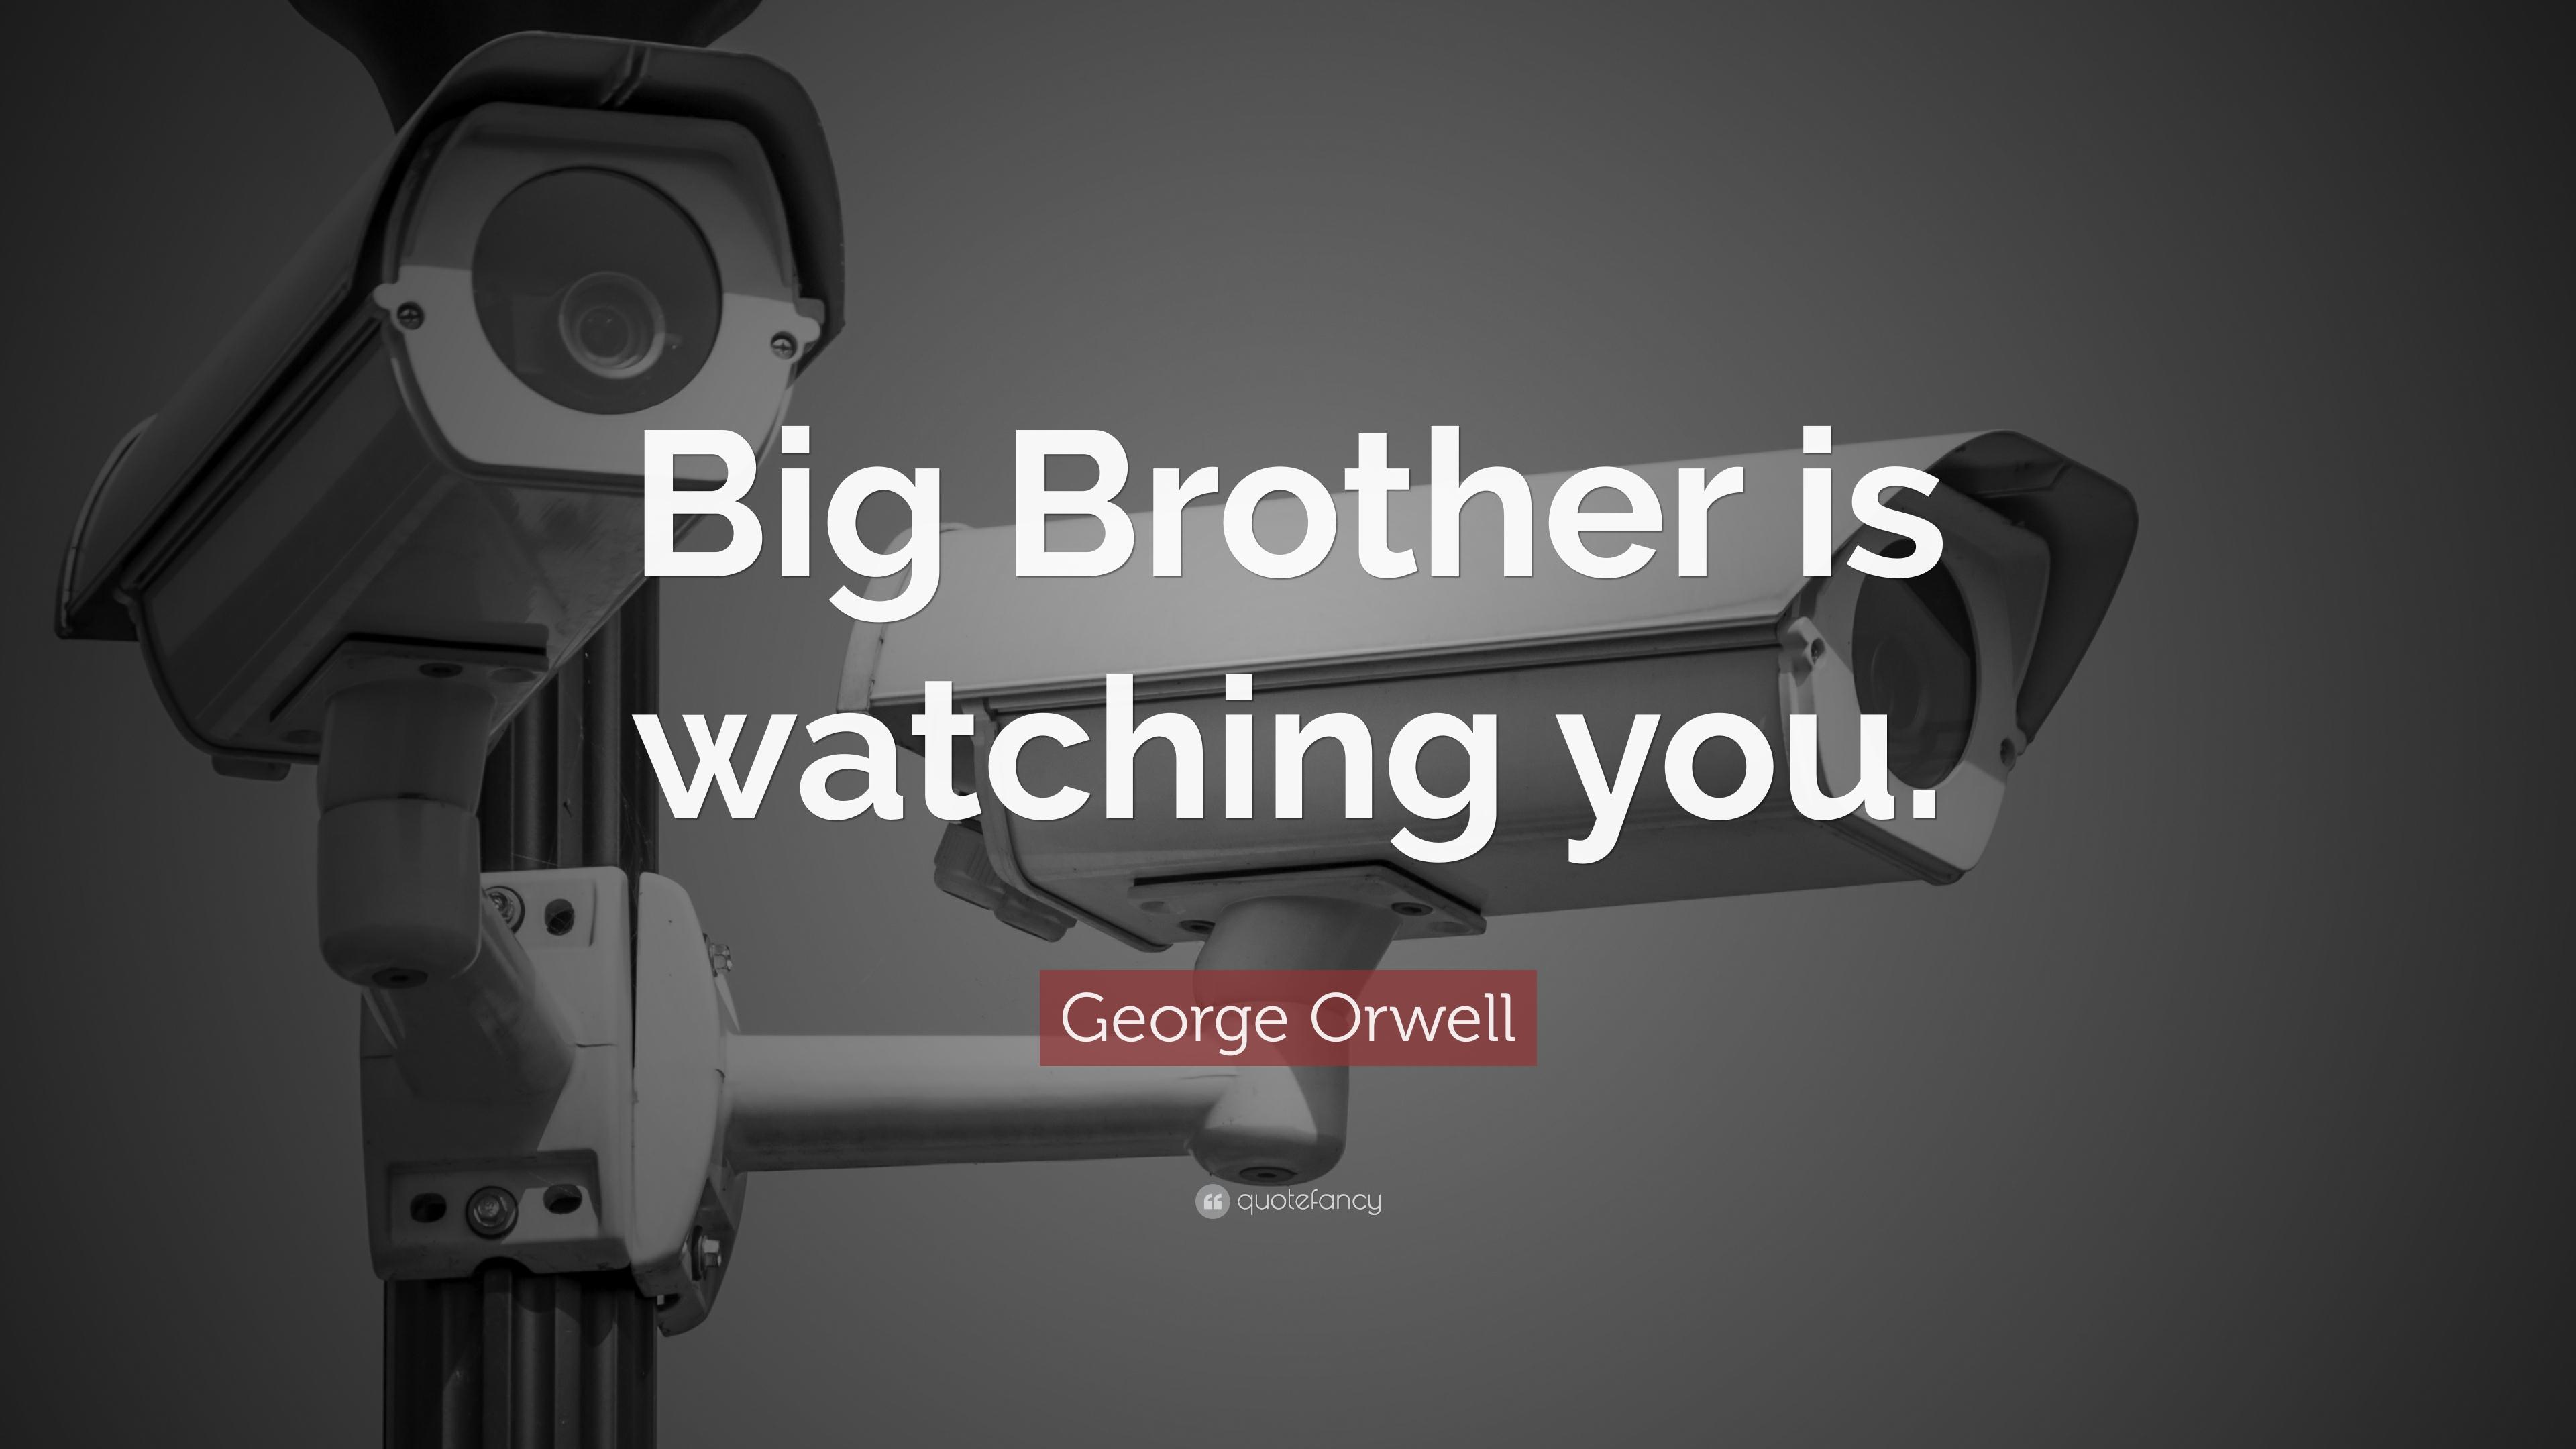 George Orwell Quote: “Big Brother is watching you.” 14 wallpaper